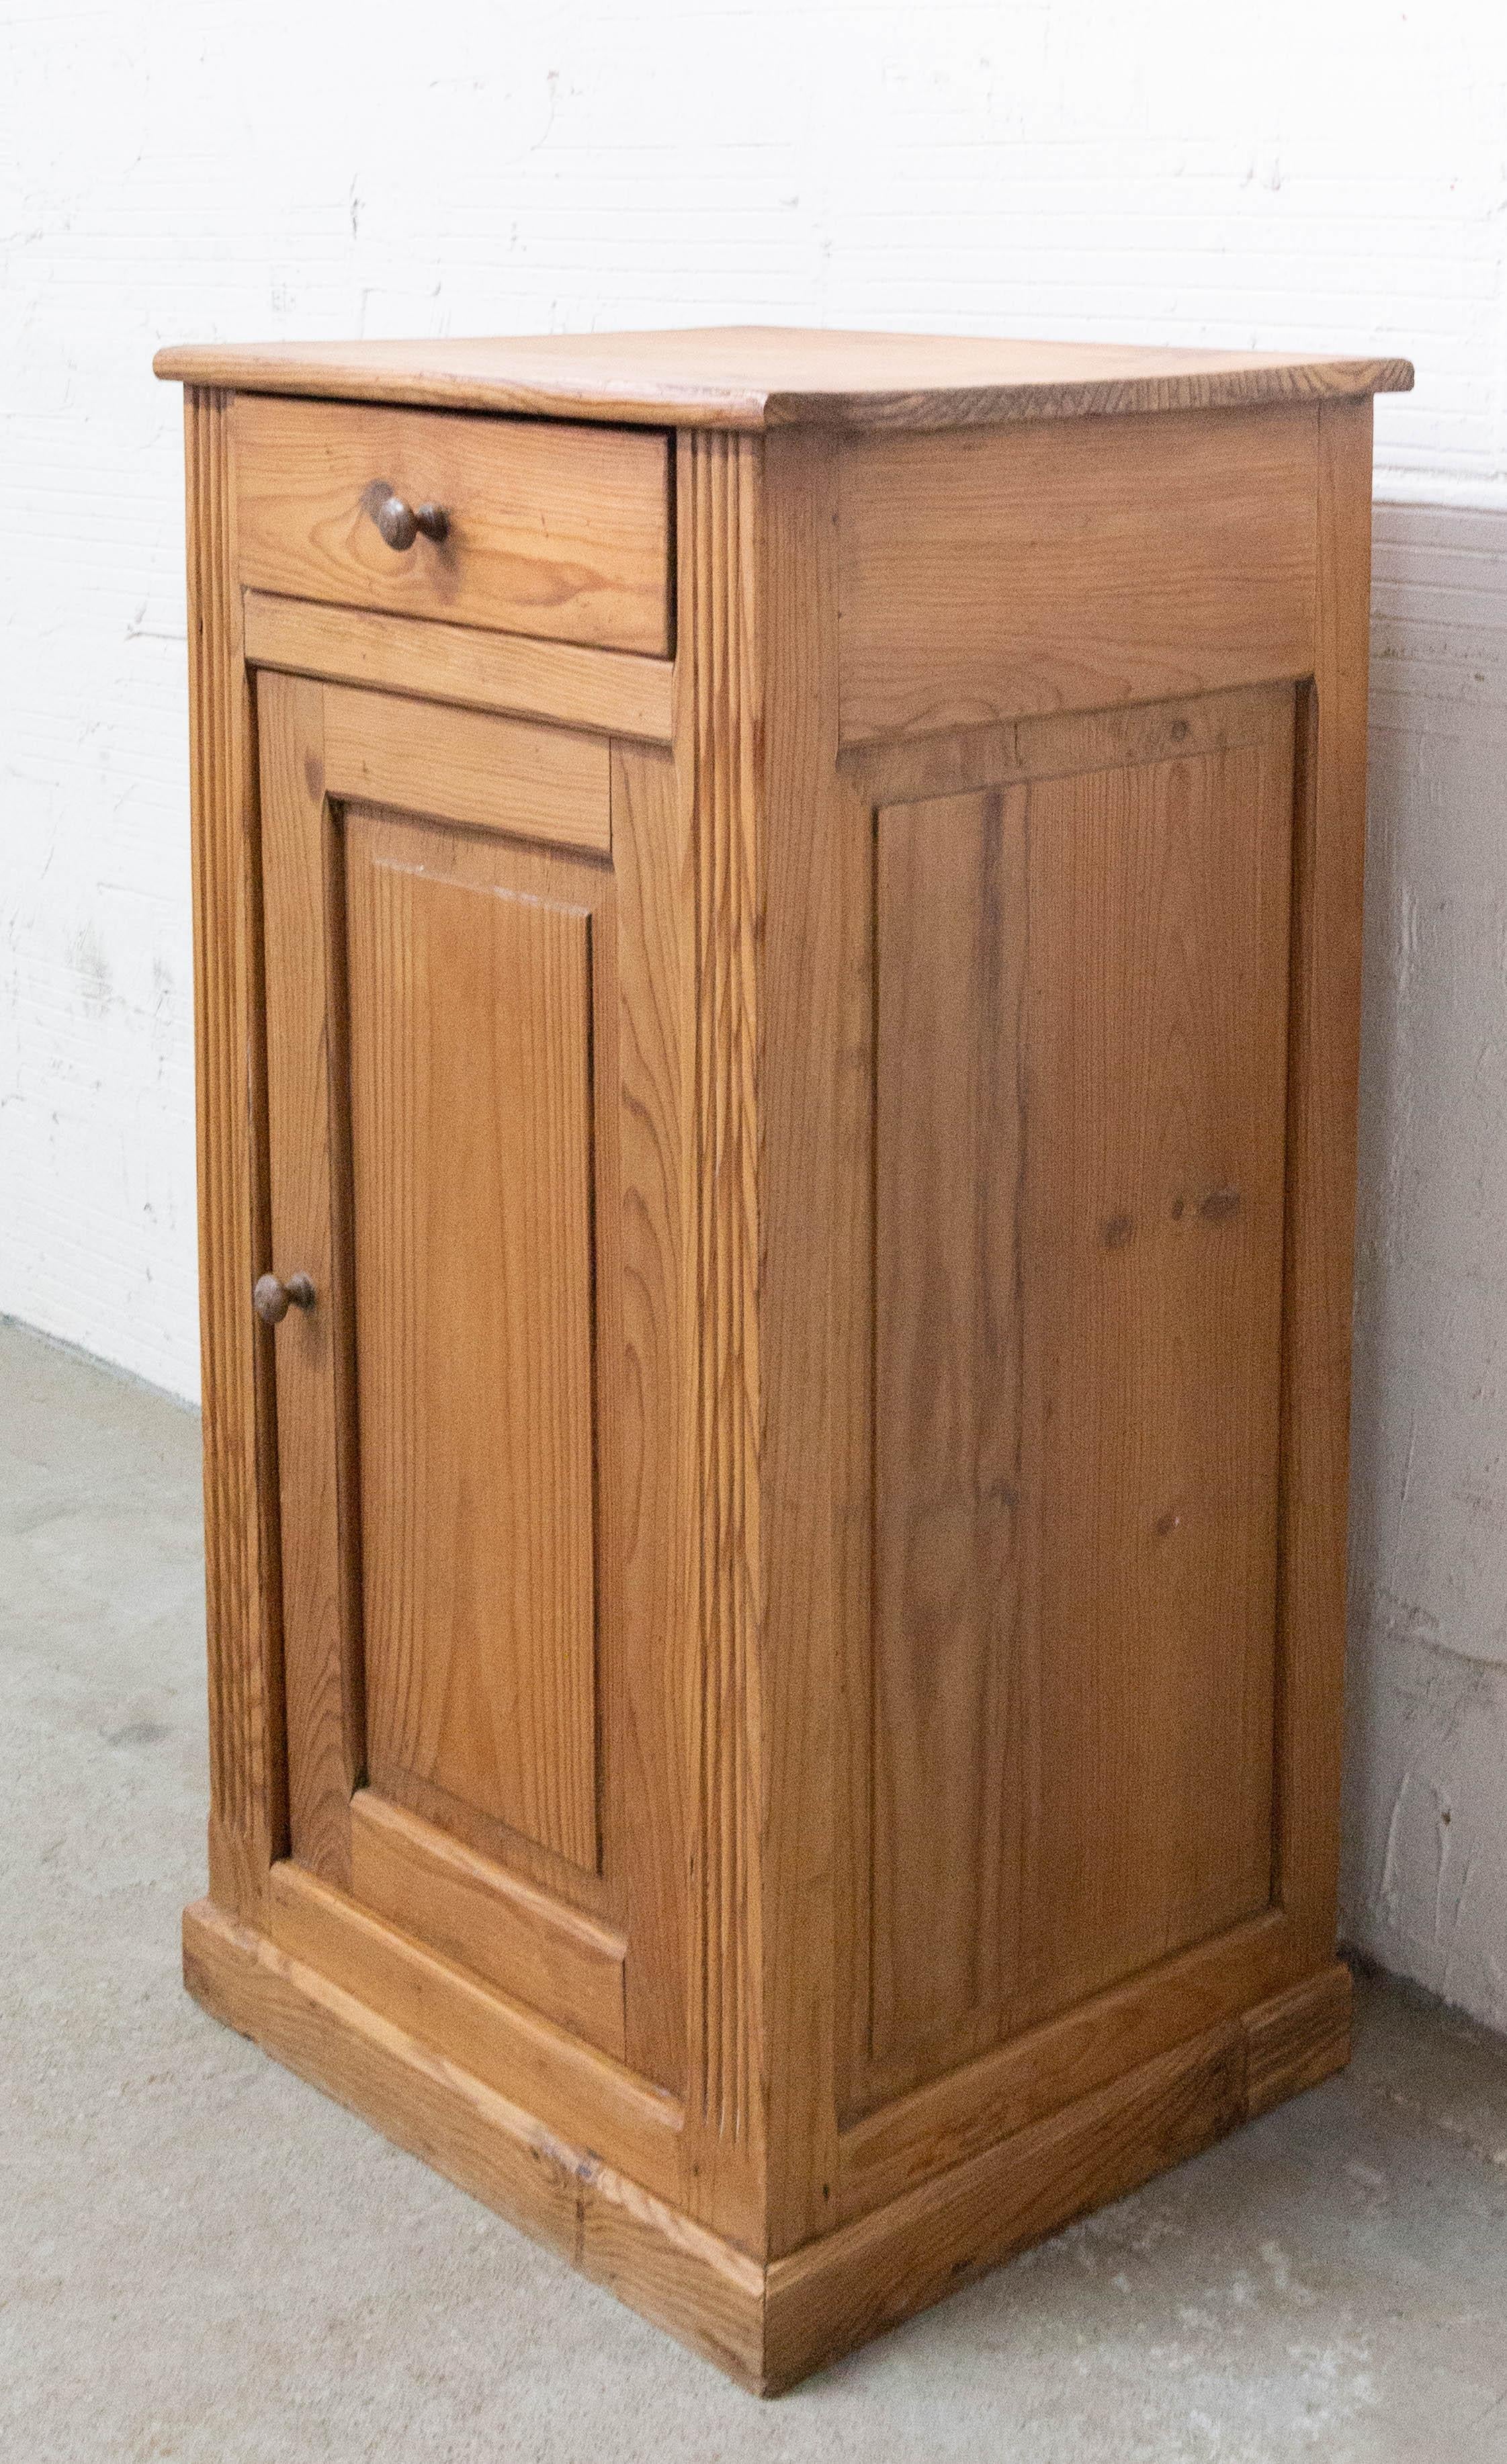 19th century French cabinet buffet
Pine wood
In good condition 

Shipping:
P 42.5/L 50.5/ H 90 cm 22 kg.